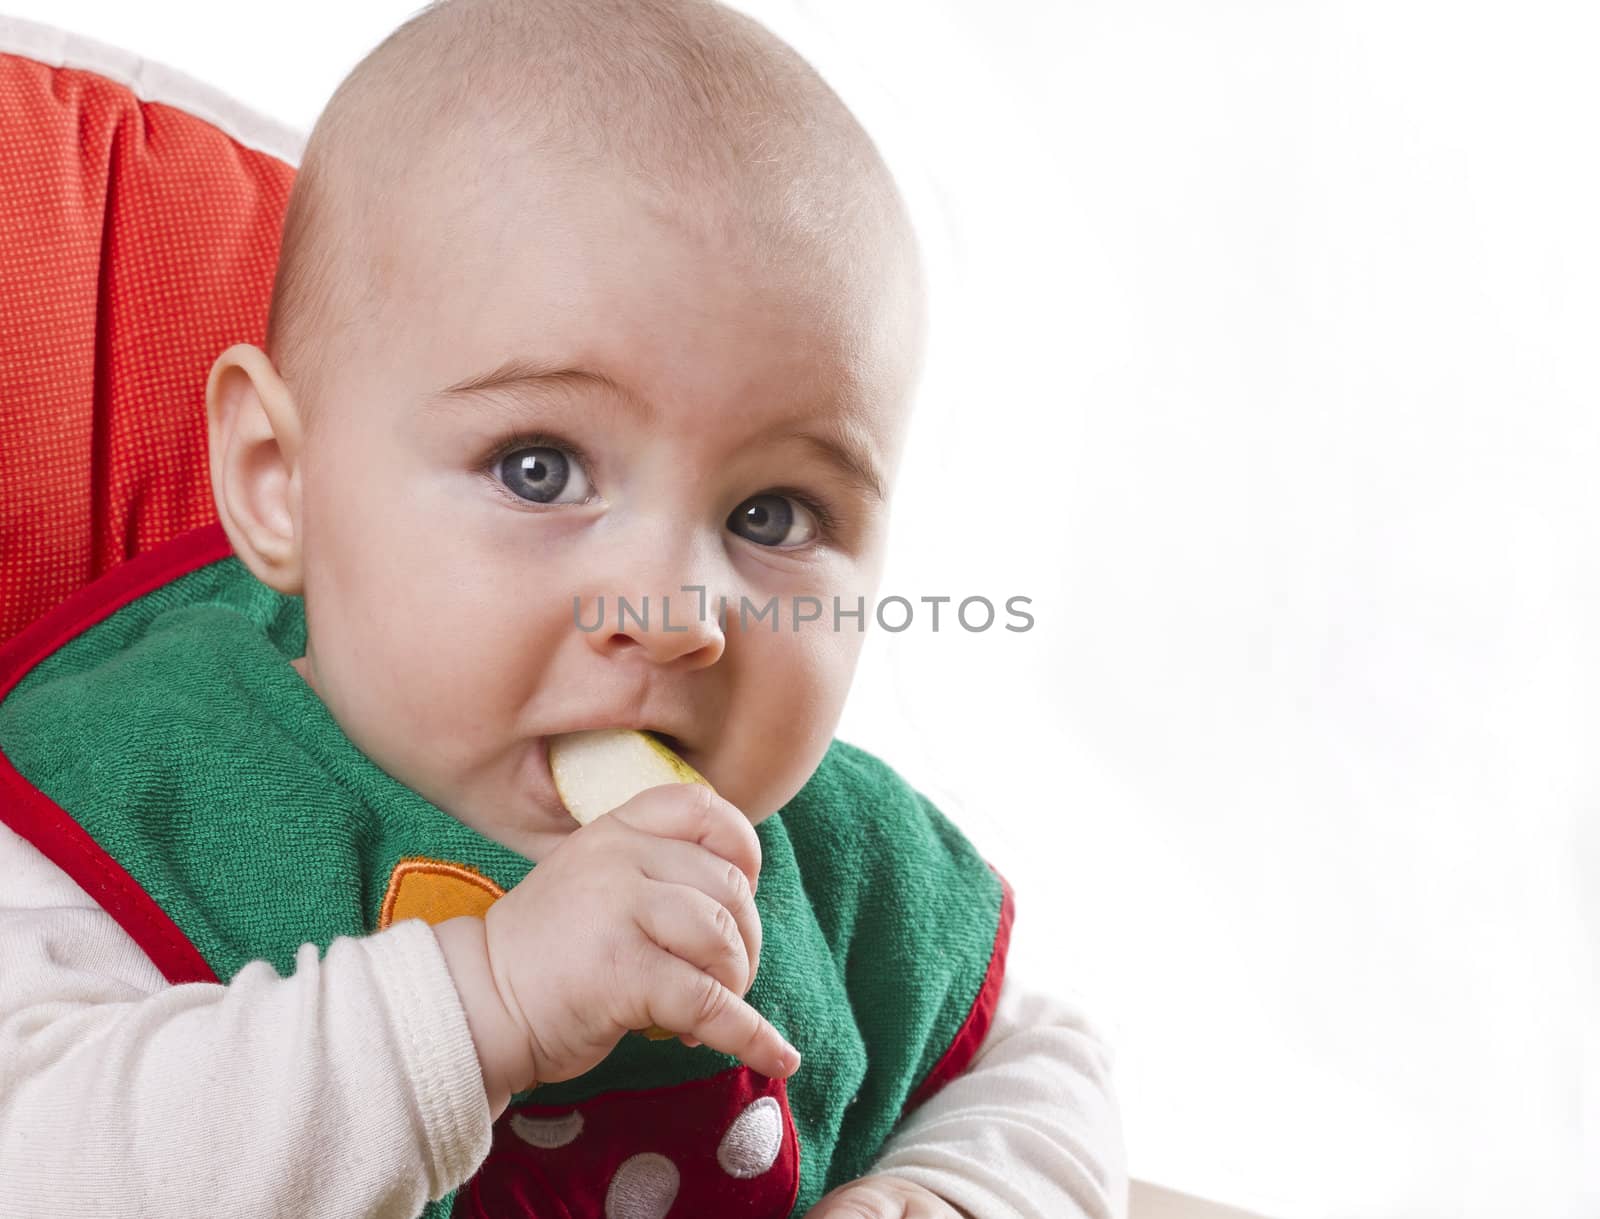 young baby sitting and eating an apple. Isolated on white.